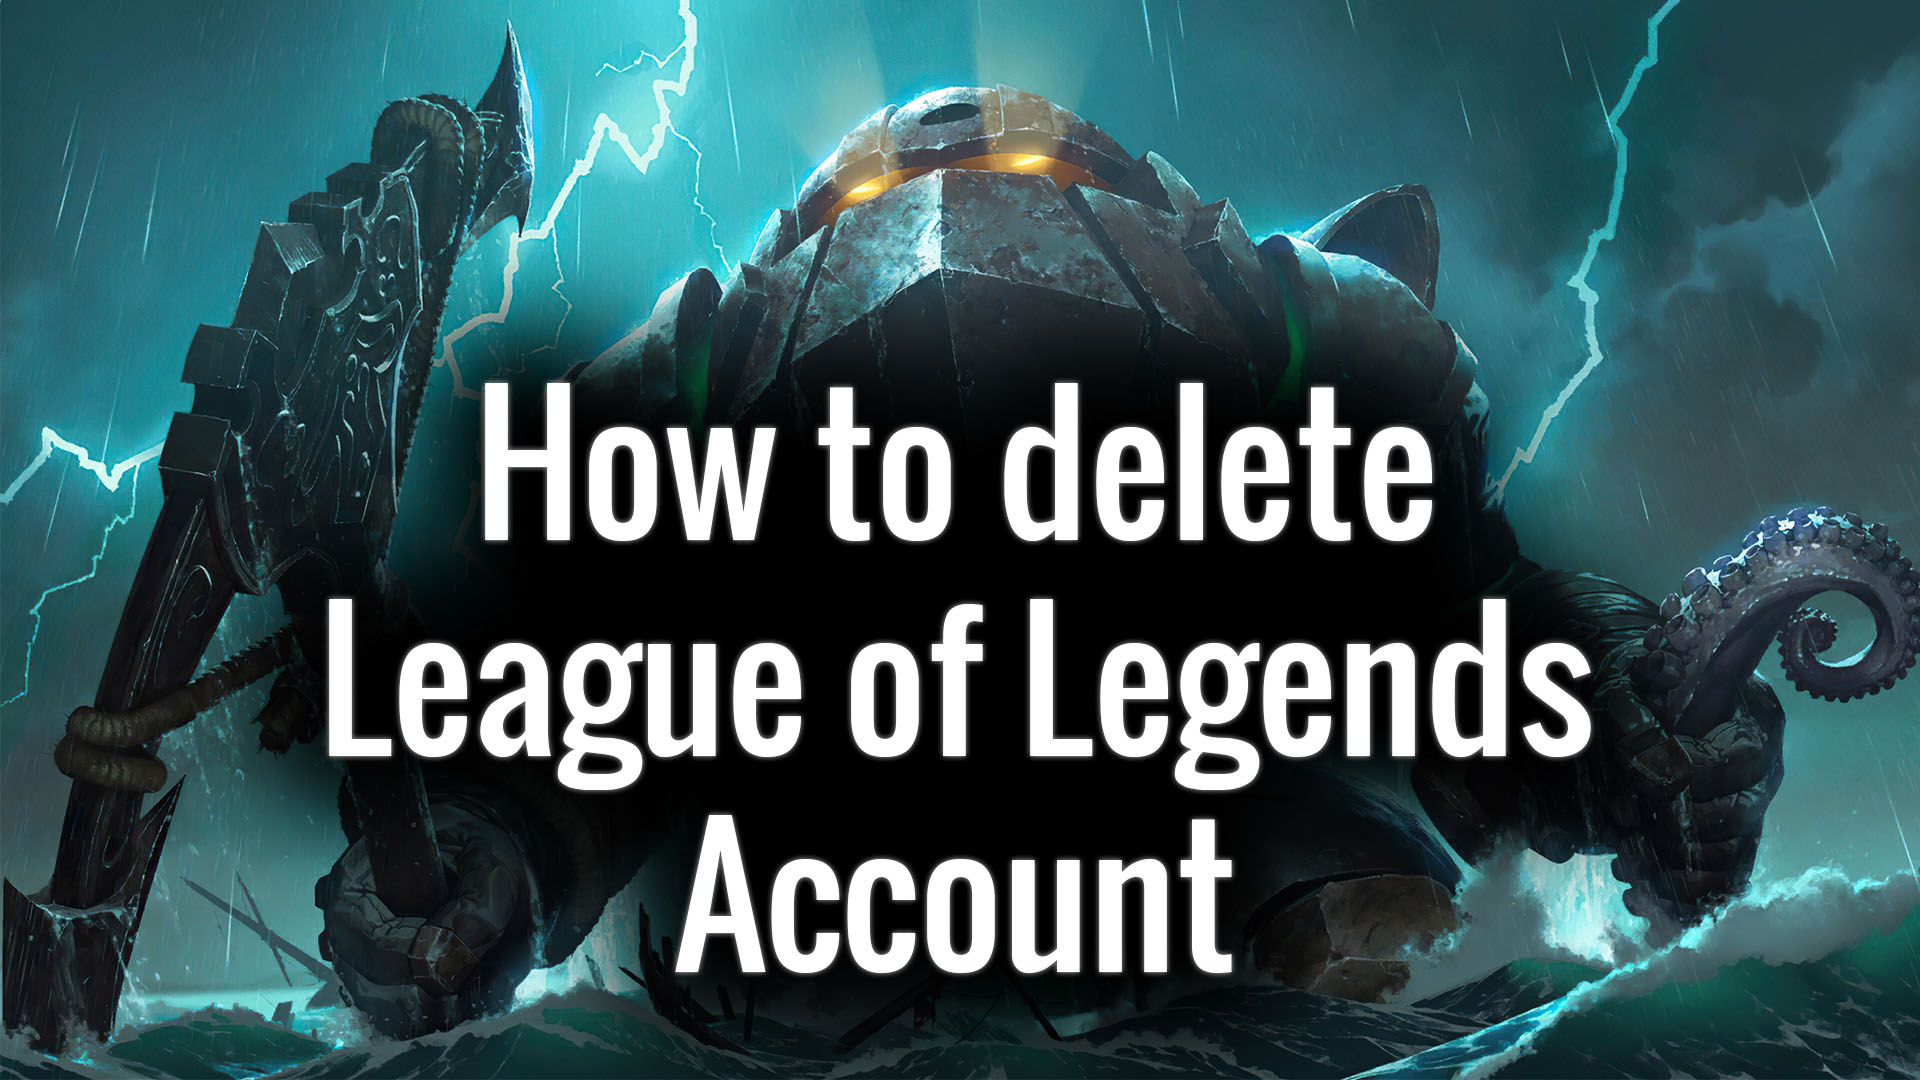 How To Delete Your League of Legends Account